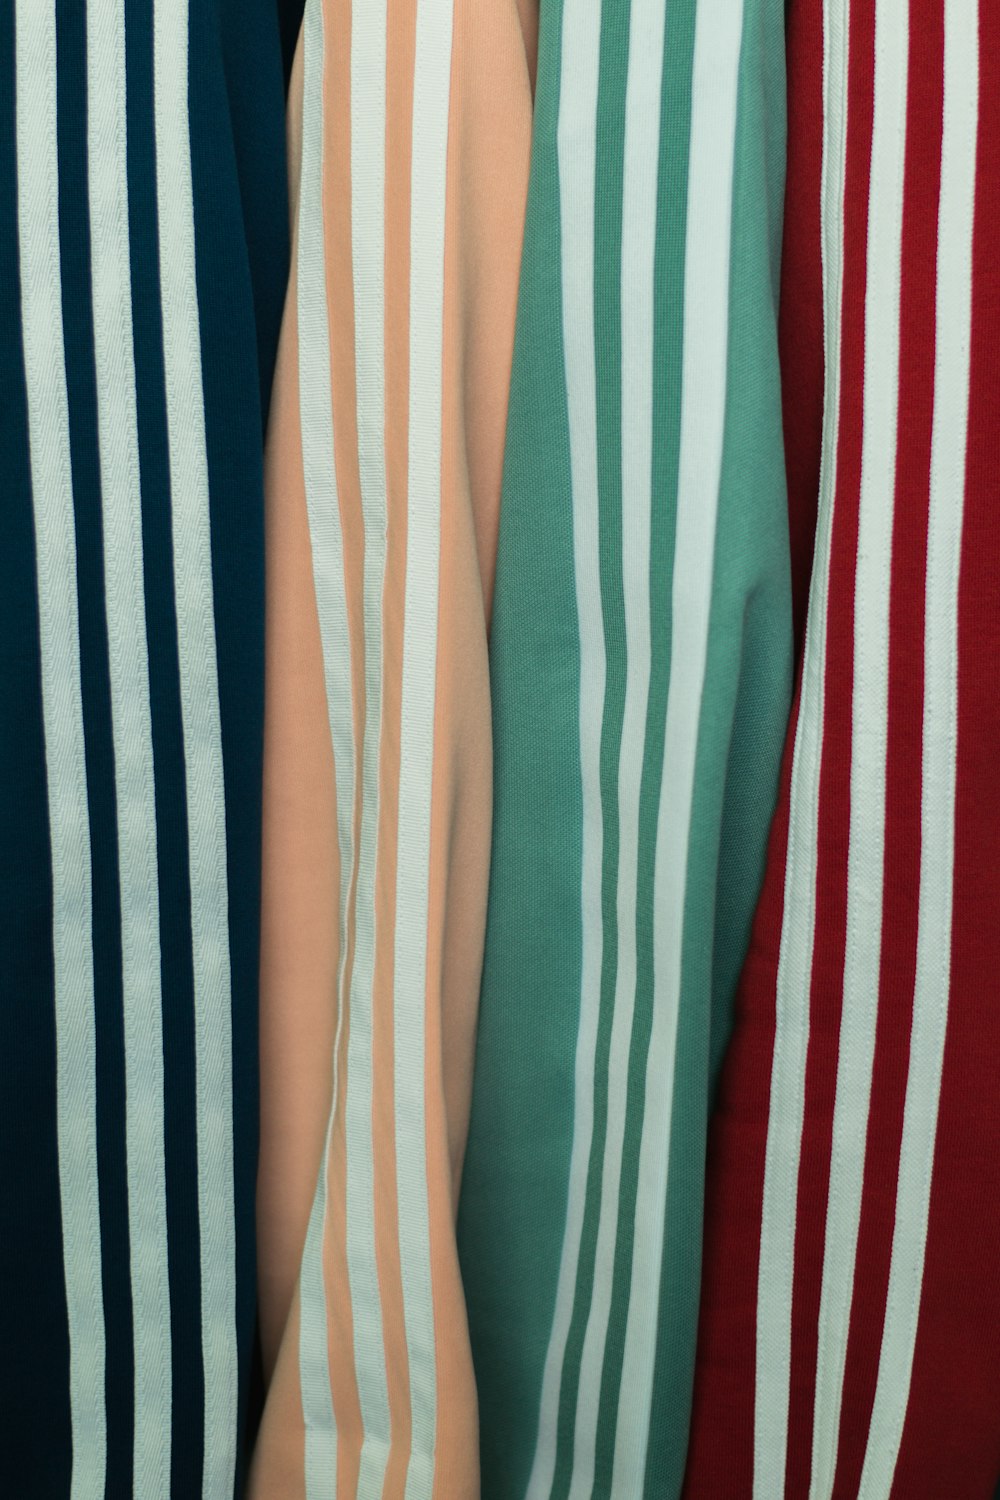 red and white striped textile